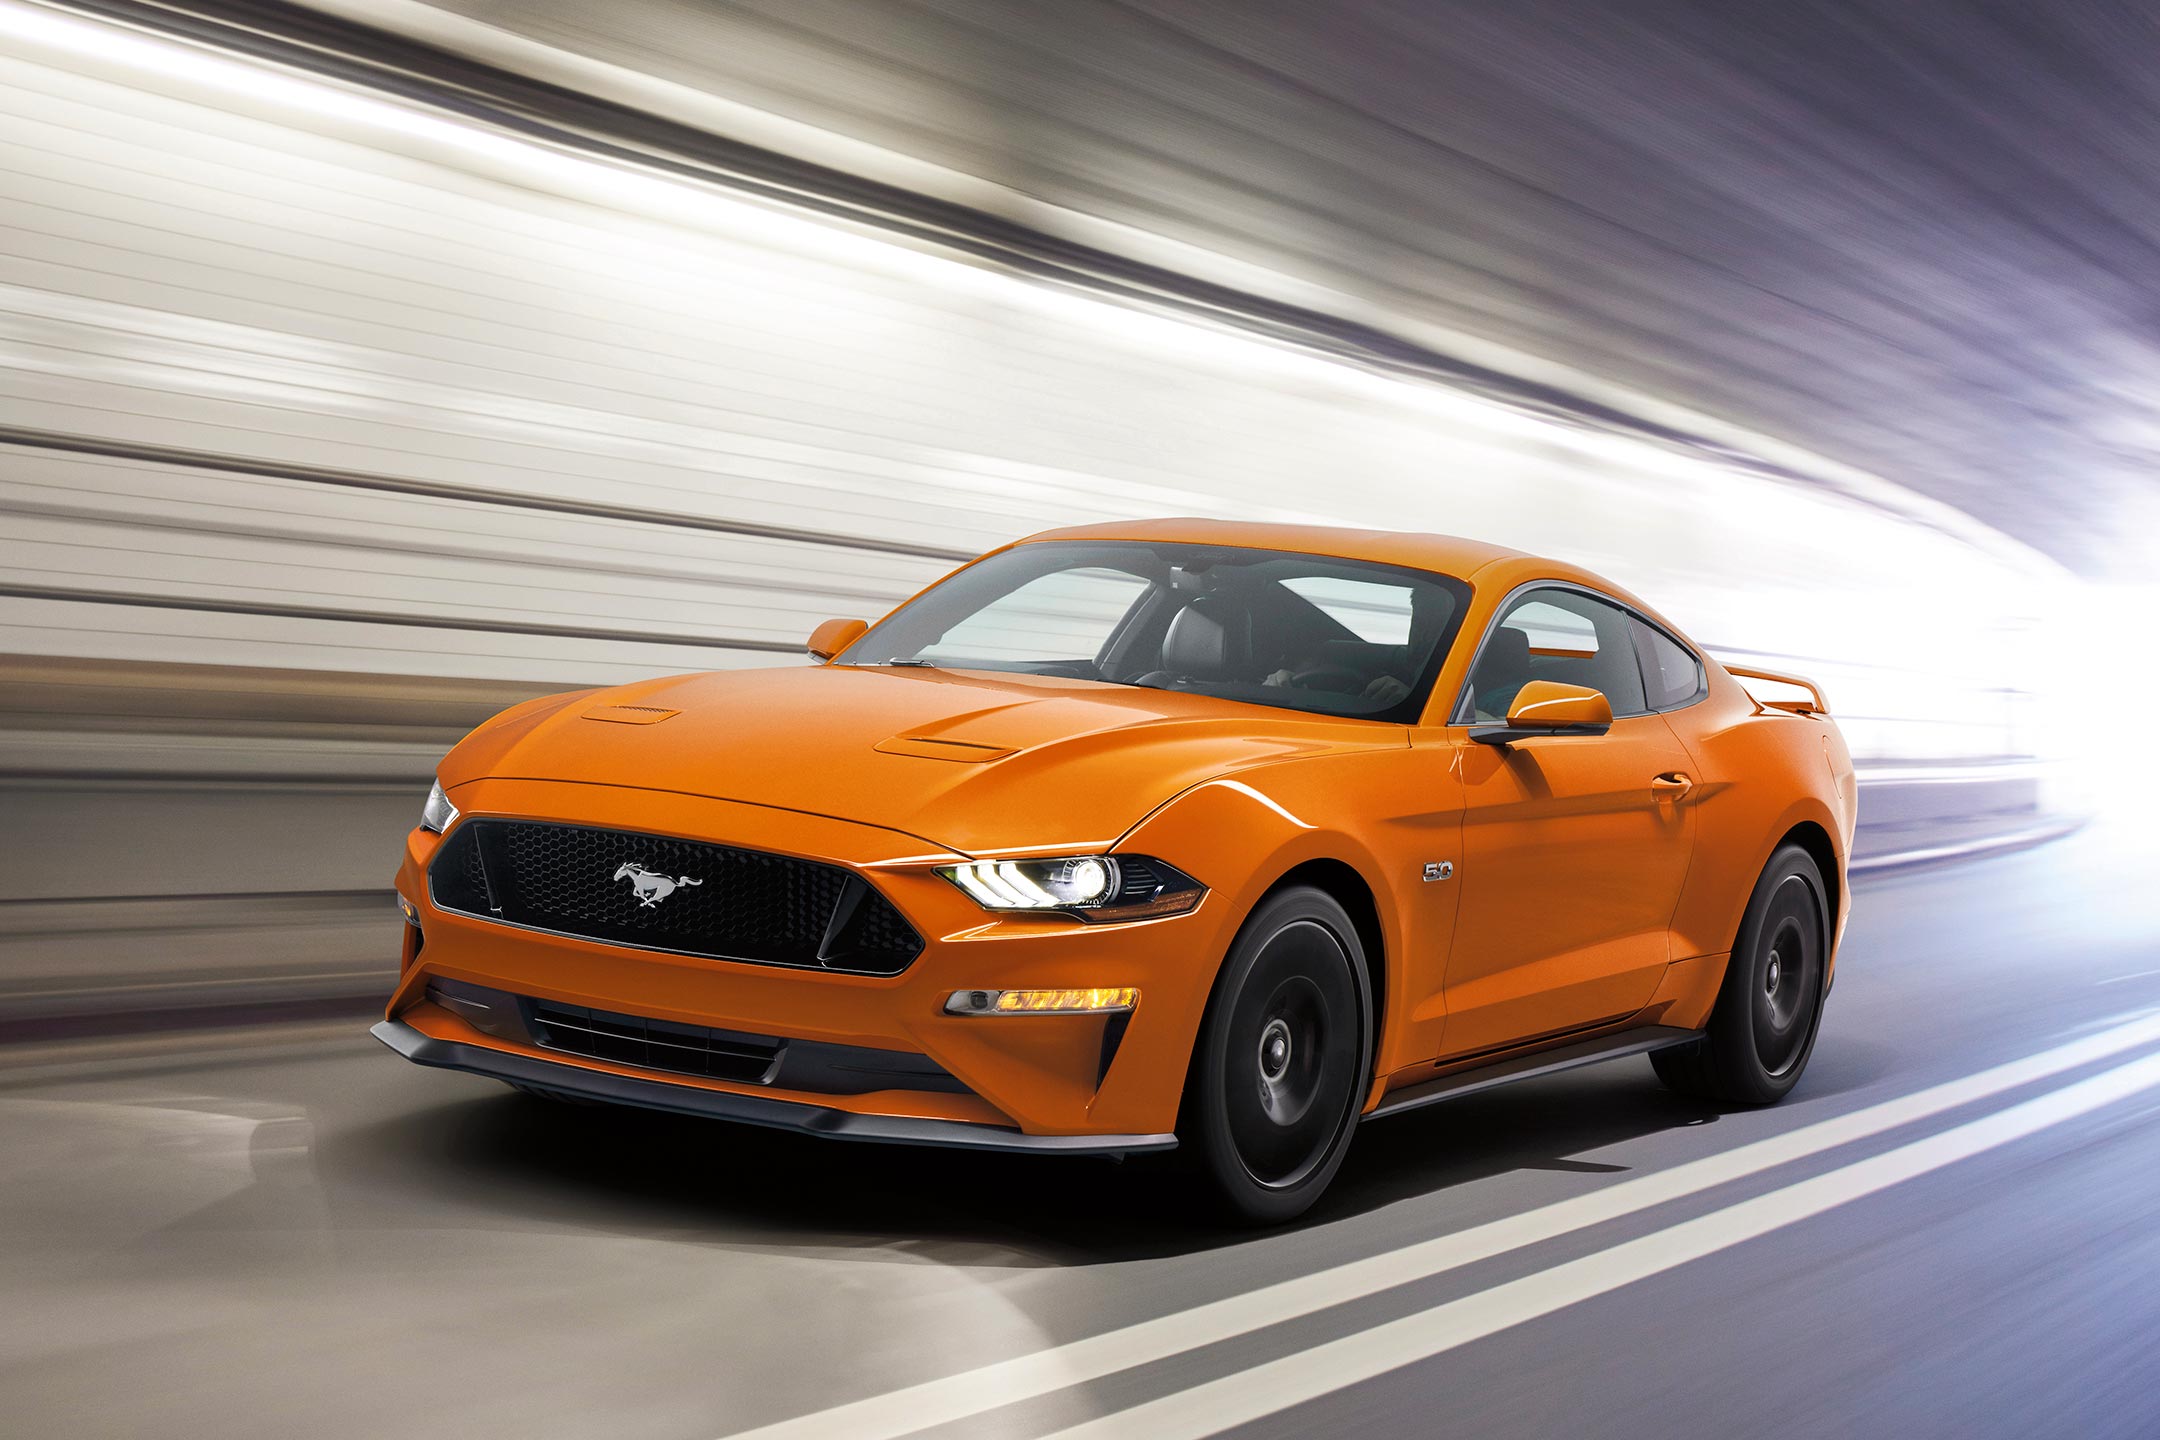 Mustang Of The Day: 2022 Ford Mustang EcoBoost Fastback